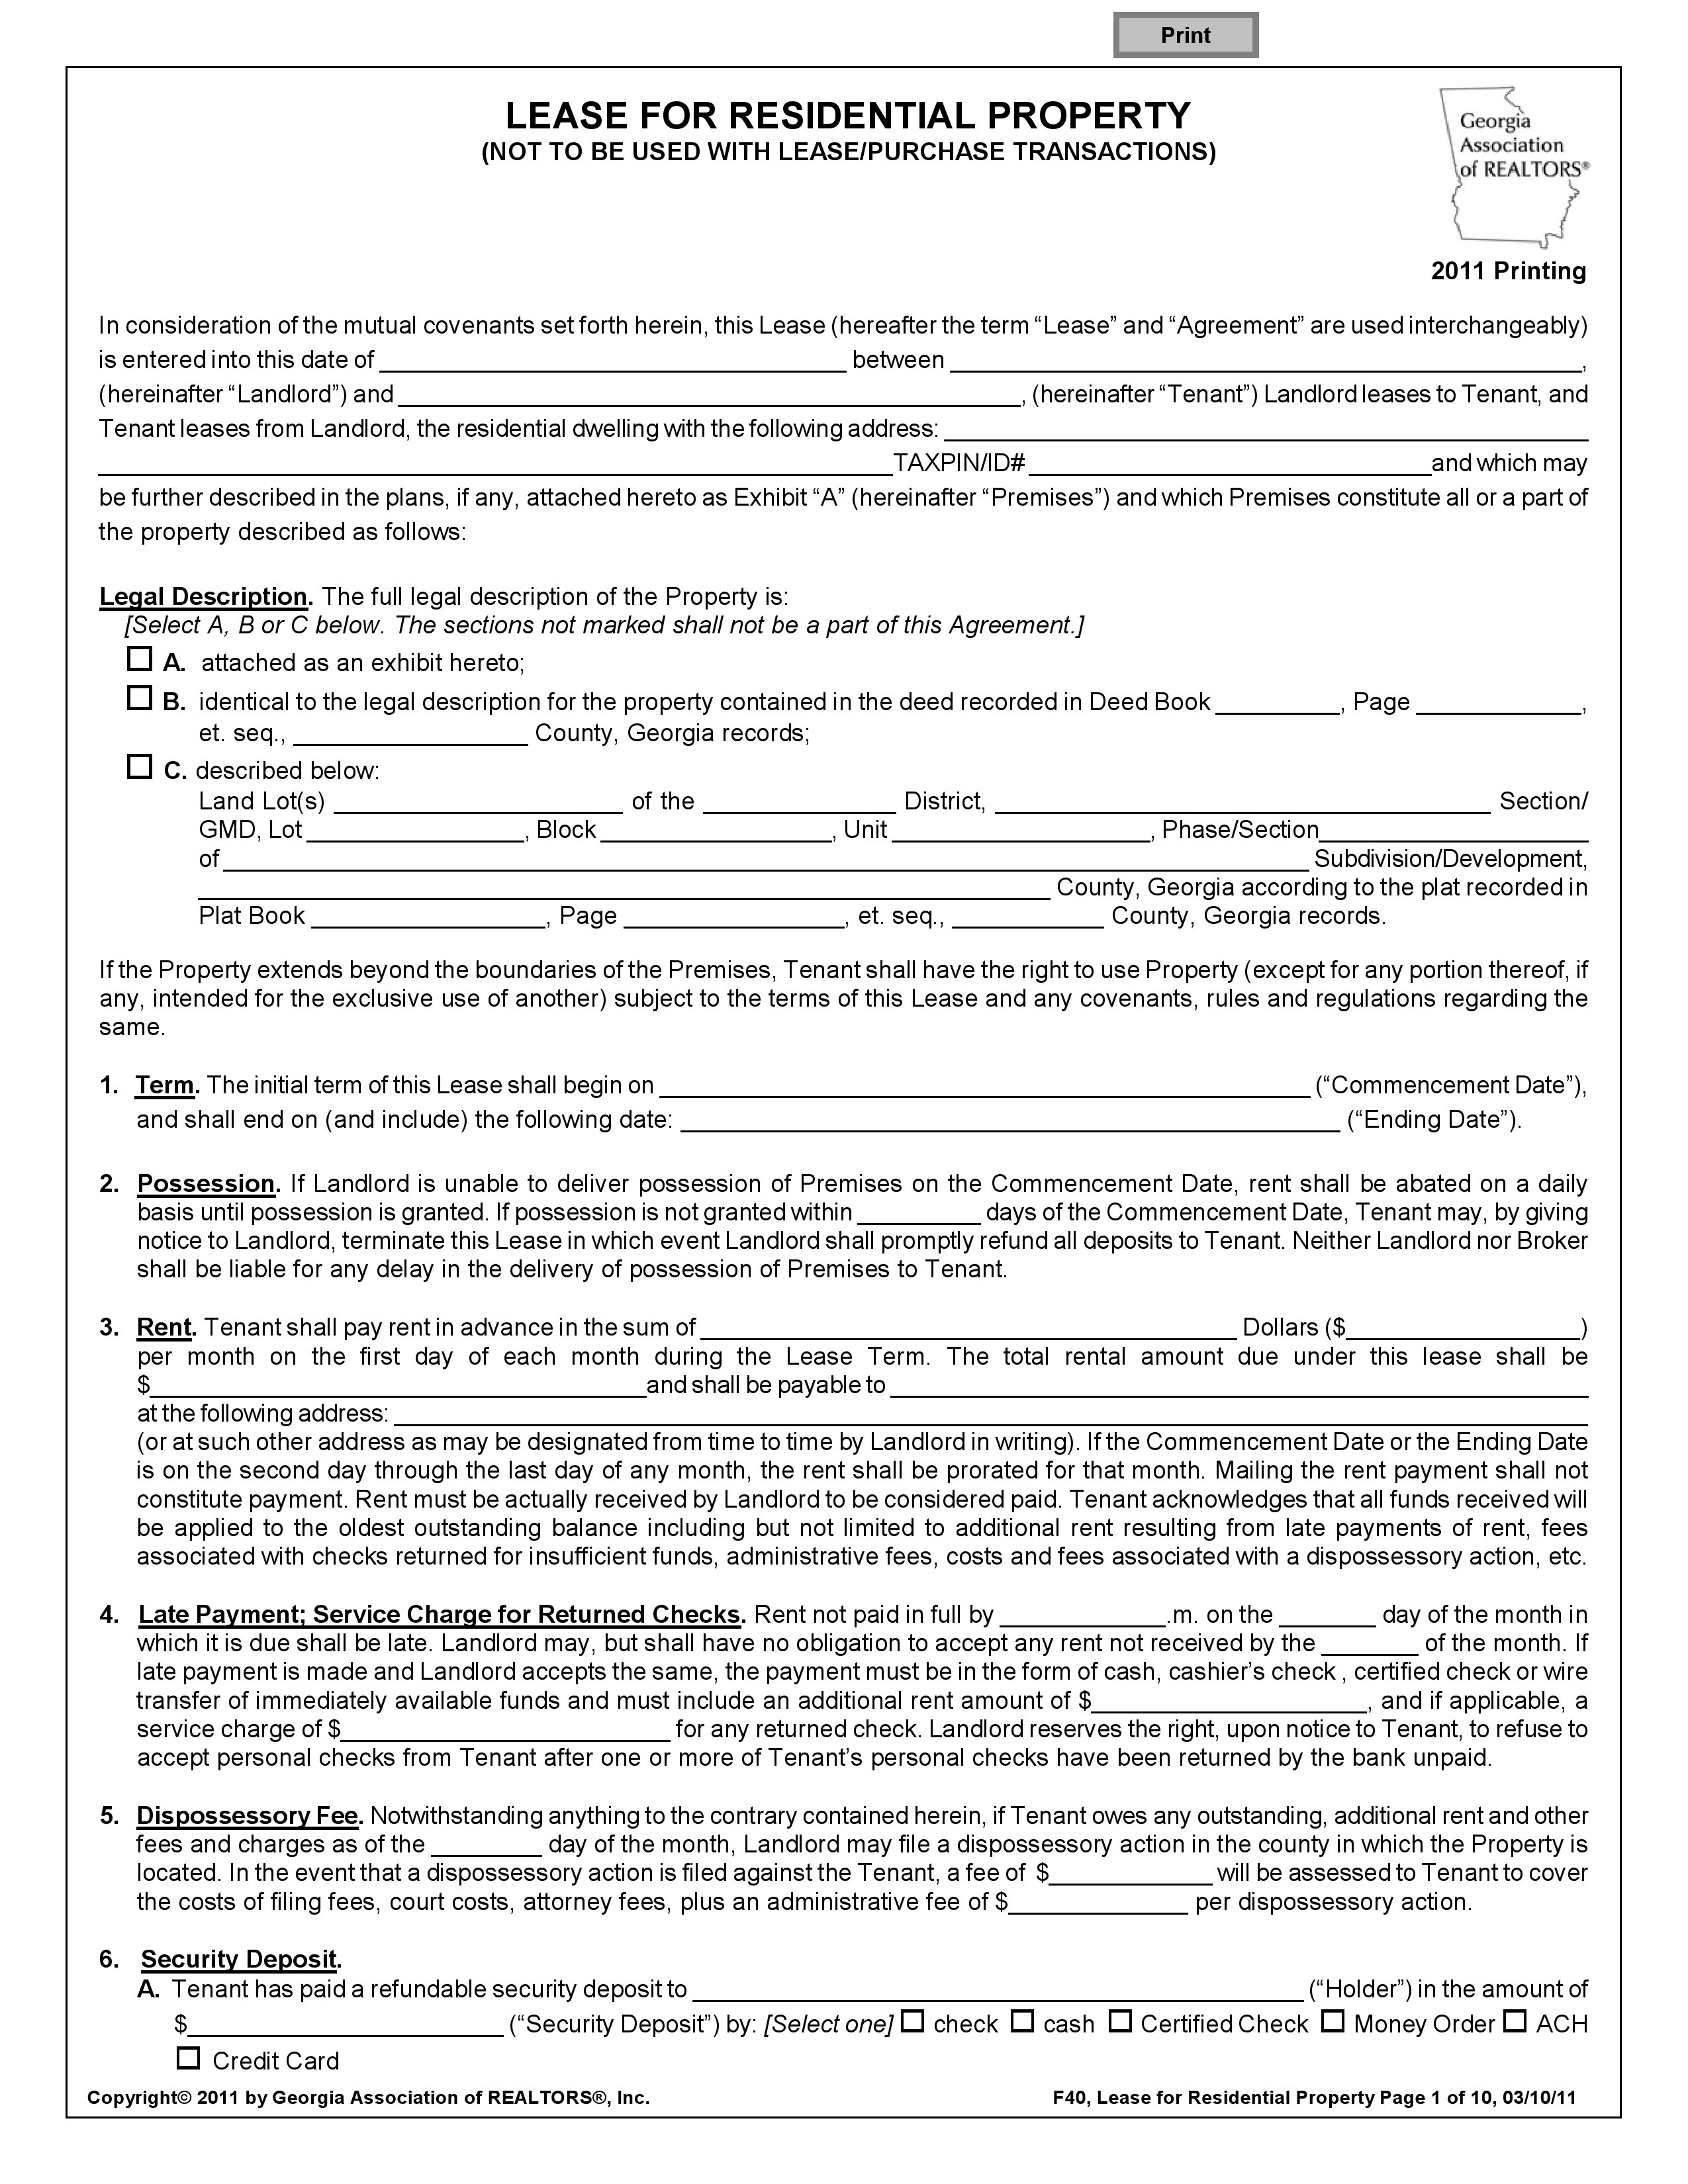 Free Ground Lease Printable Form In Commercial Real Estate Printable 